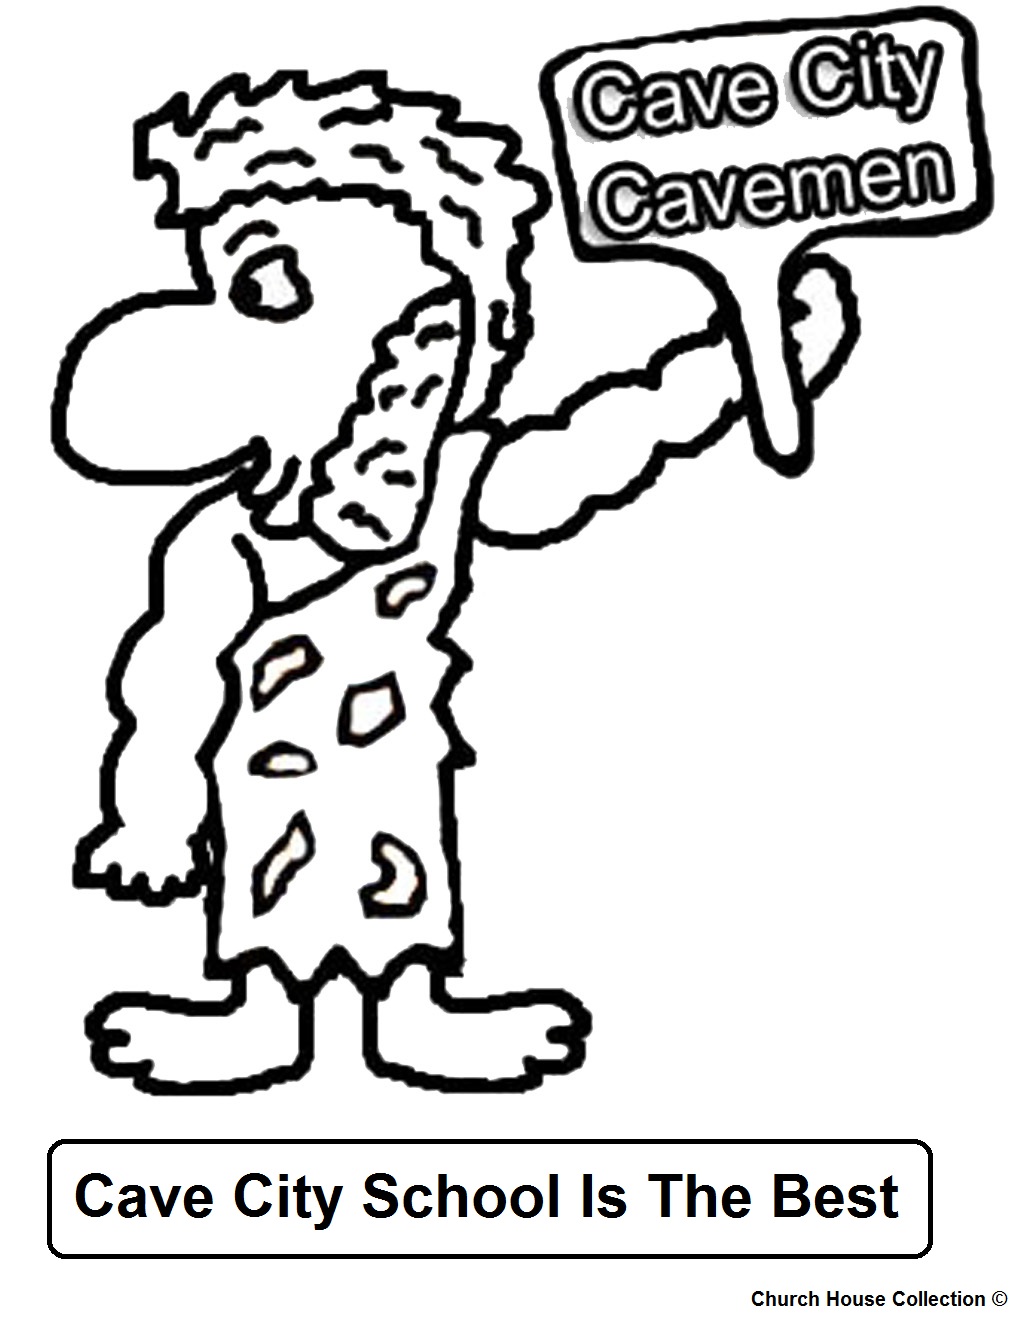     City Caveman Coloring Pages   Other Cave City School Coloring Pages